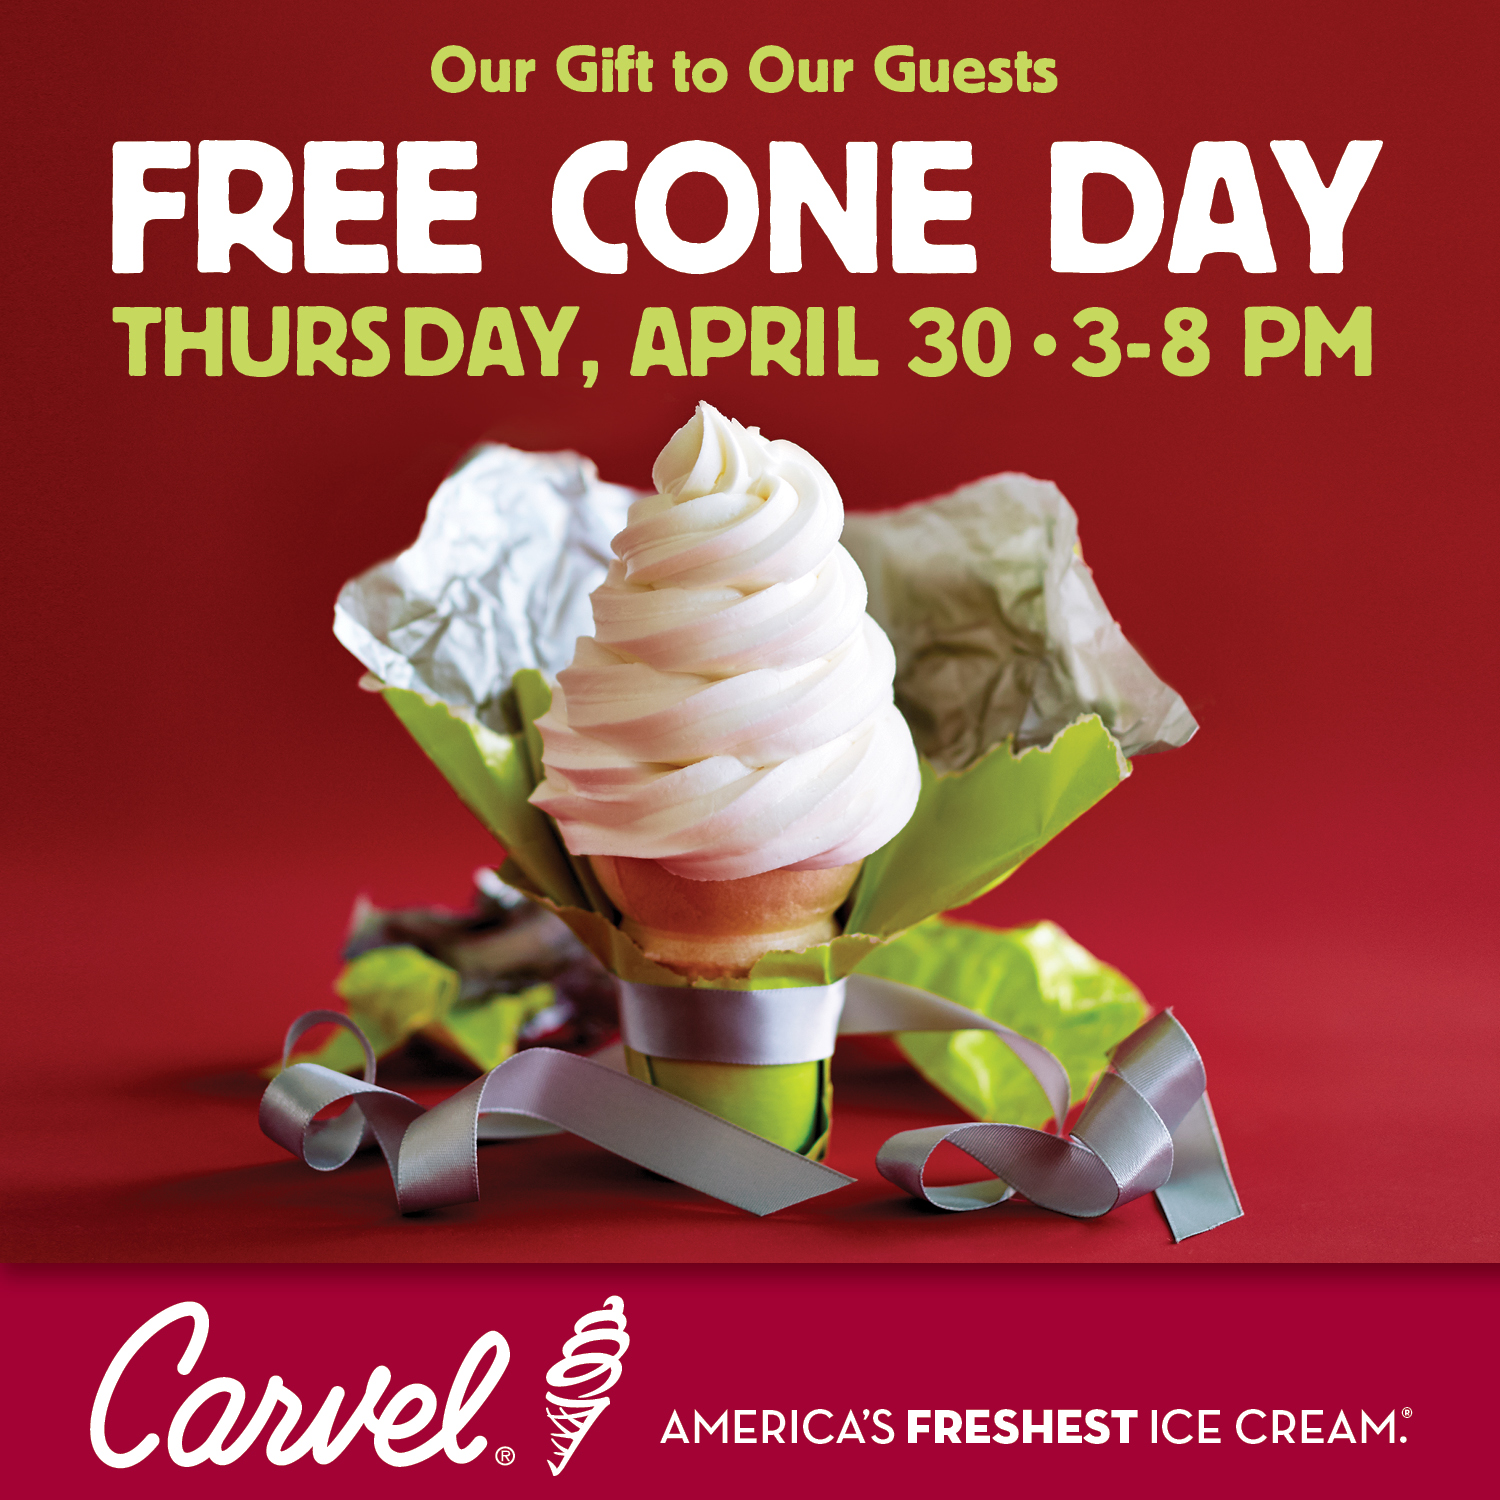 Free Cone Day 2015 Image